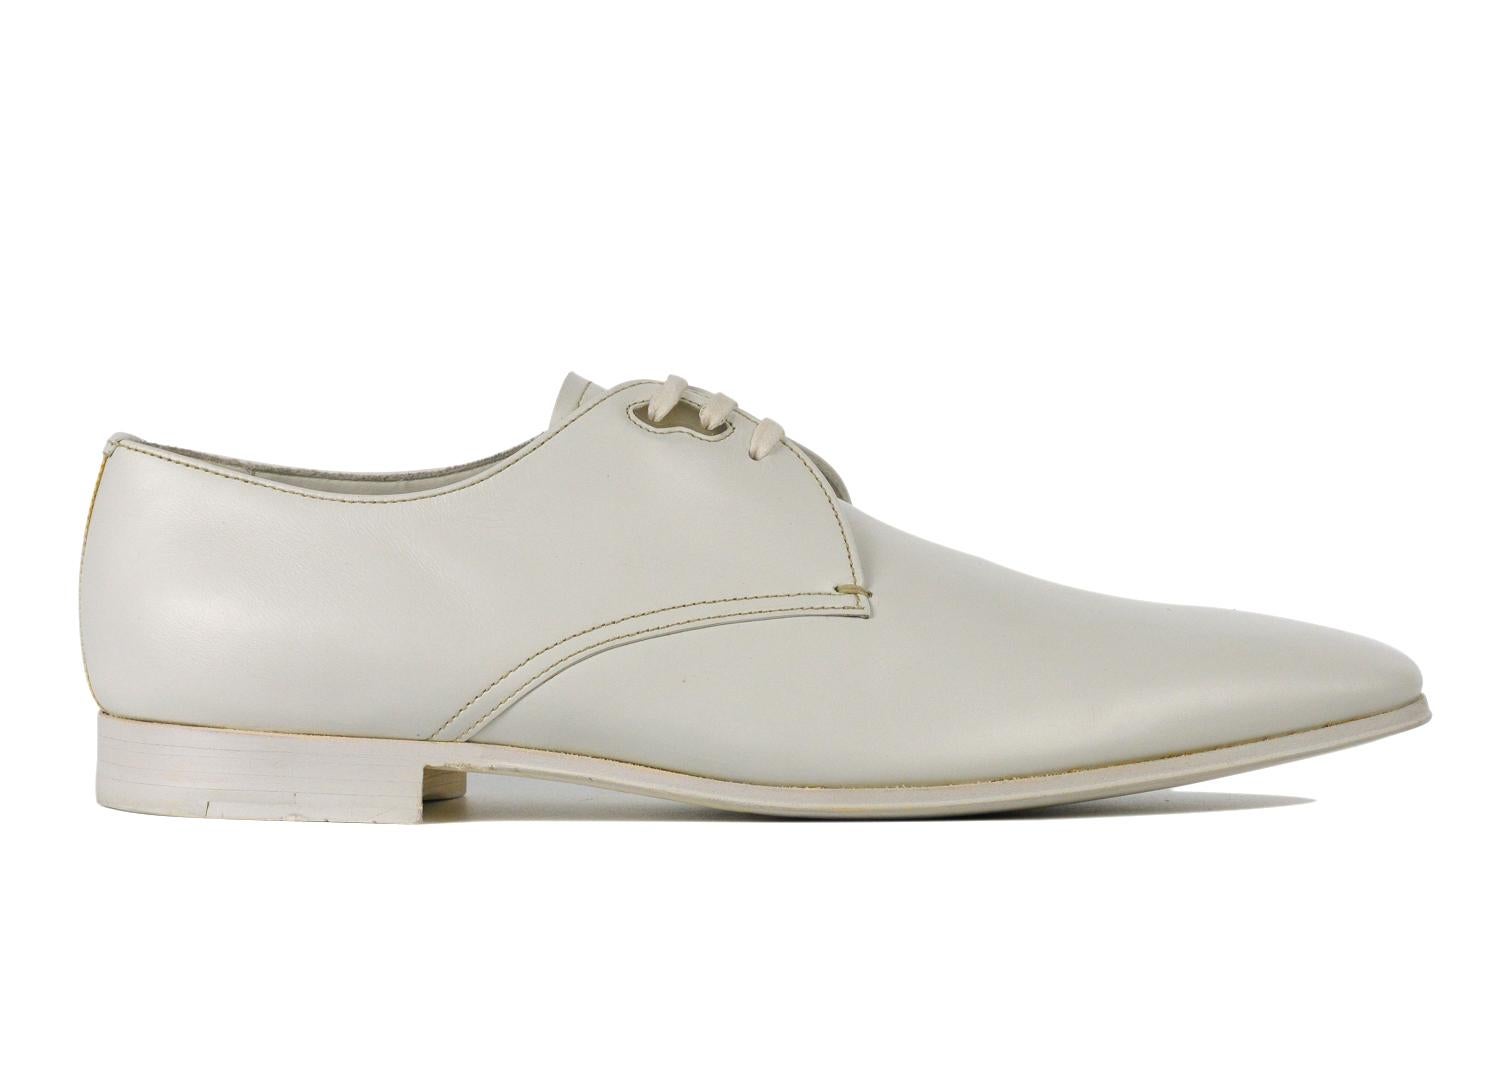 Prada - Sleek and timeless. The number one name in luxury menswear. Make your look incredible with these Prada Derby Shoes, presented in white smooth leather for an undeniably sophisticated look. Handcrafted in Italy. They are guaranteed to make a